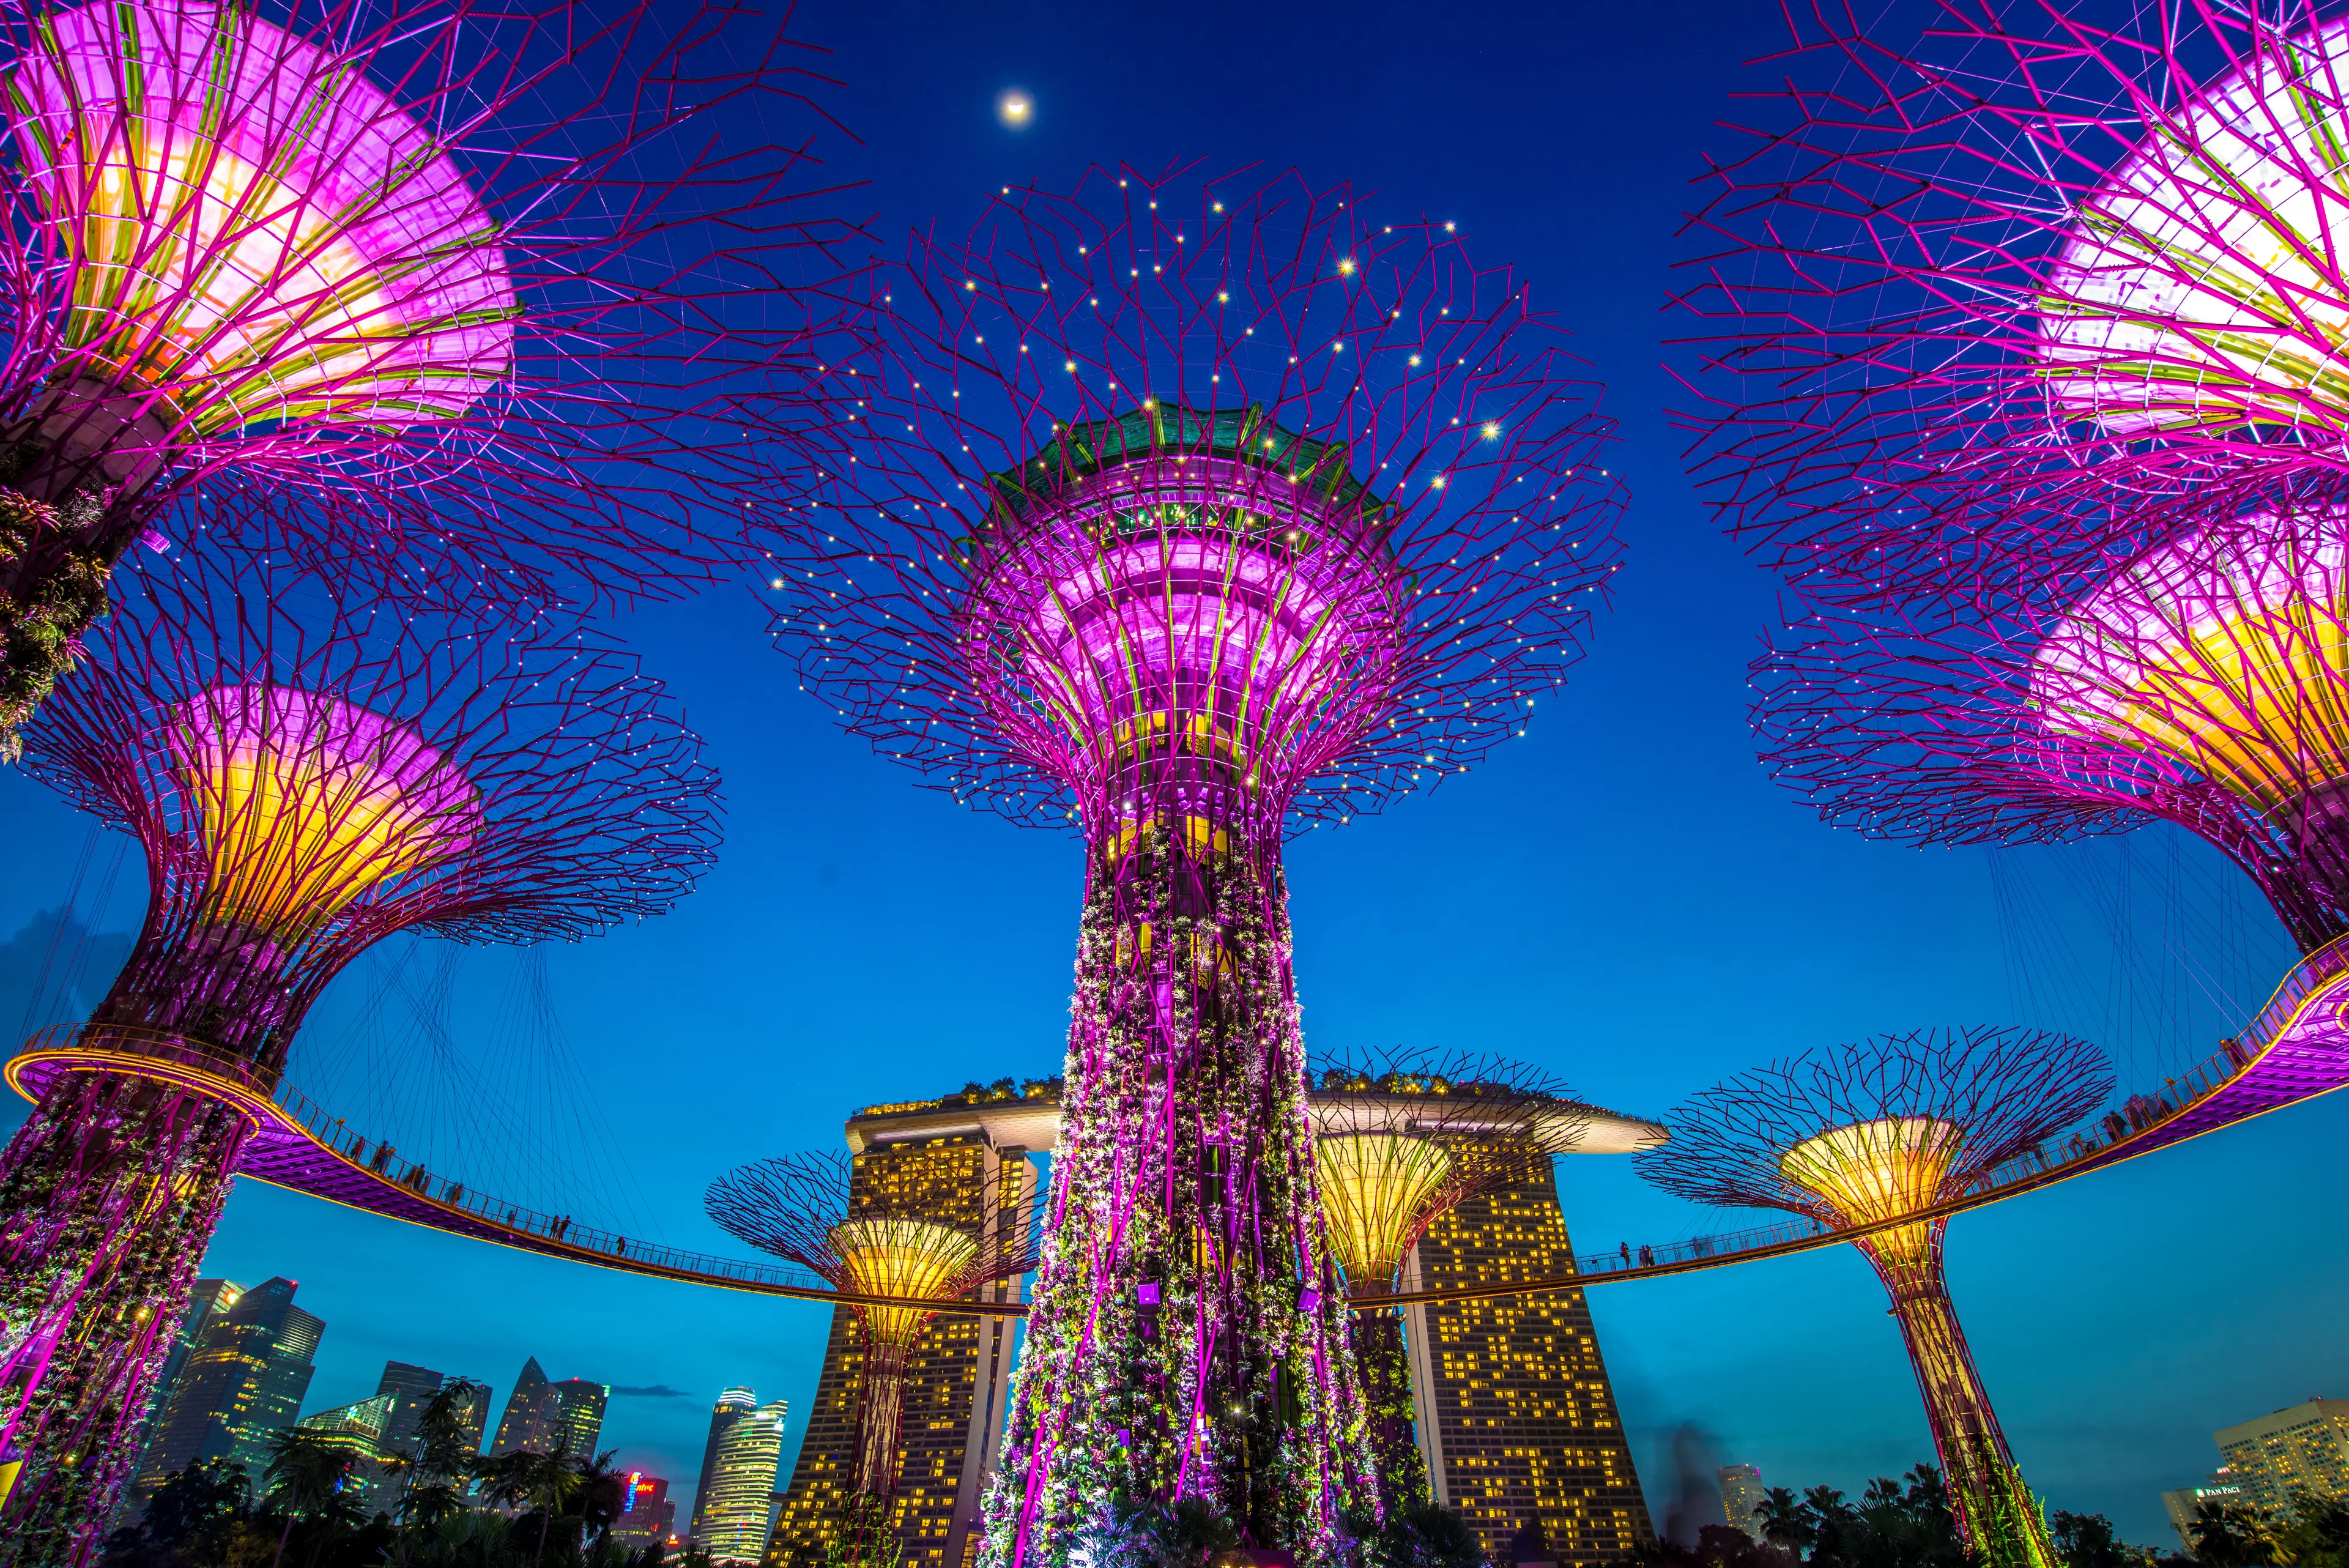 1-Day Local Food, Wine & Nightlife Tour with Friends in Singapore